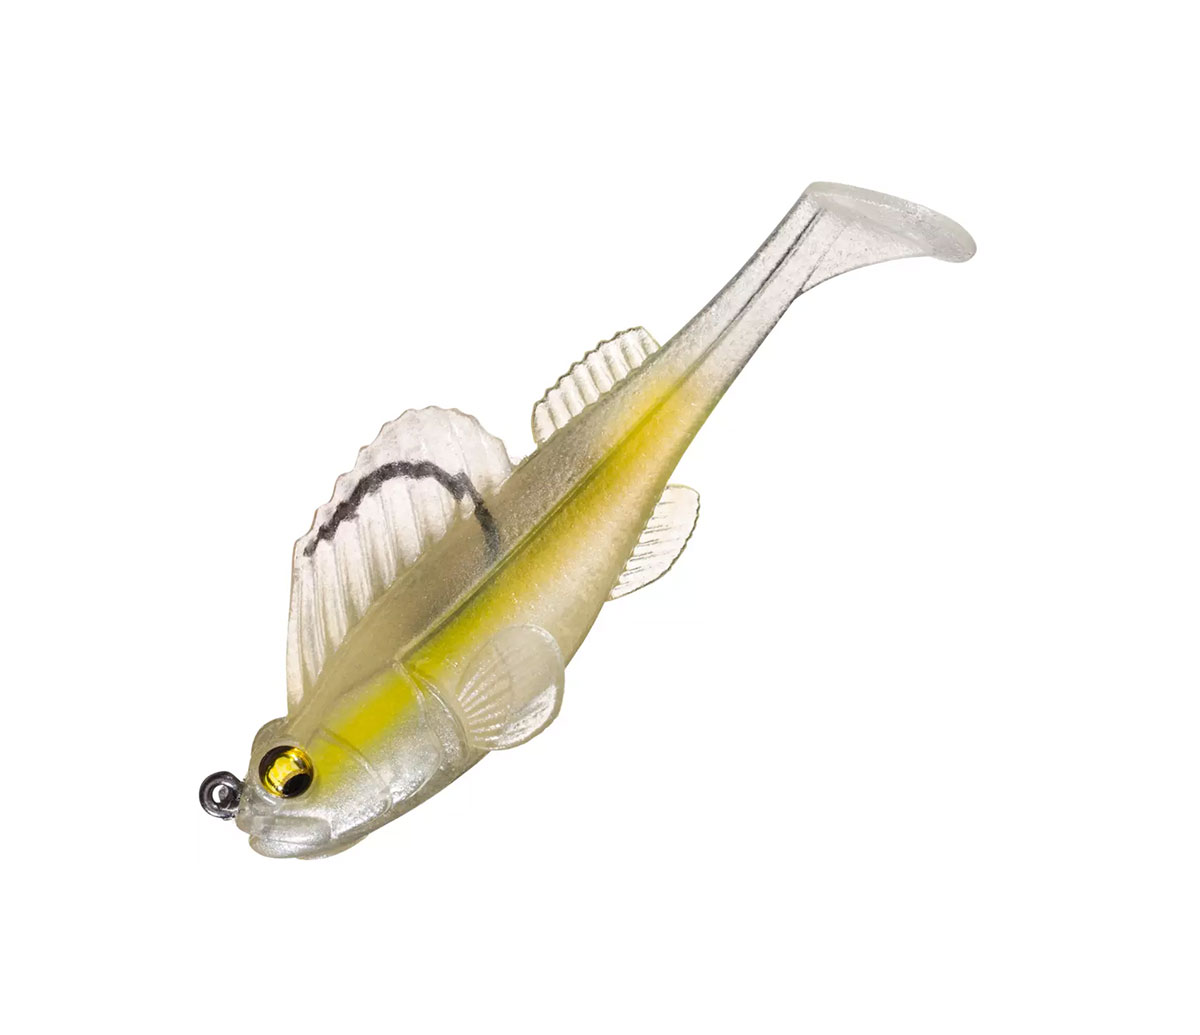 Saltwater Soft Plastic Lures Baits Pre-rigged Fishing Lures For Bass Trout  Crappie Salmon